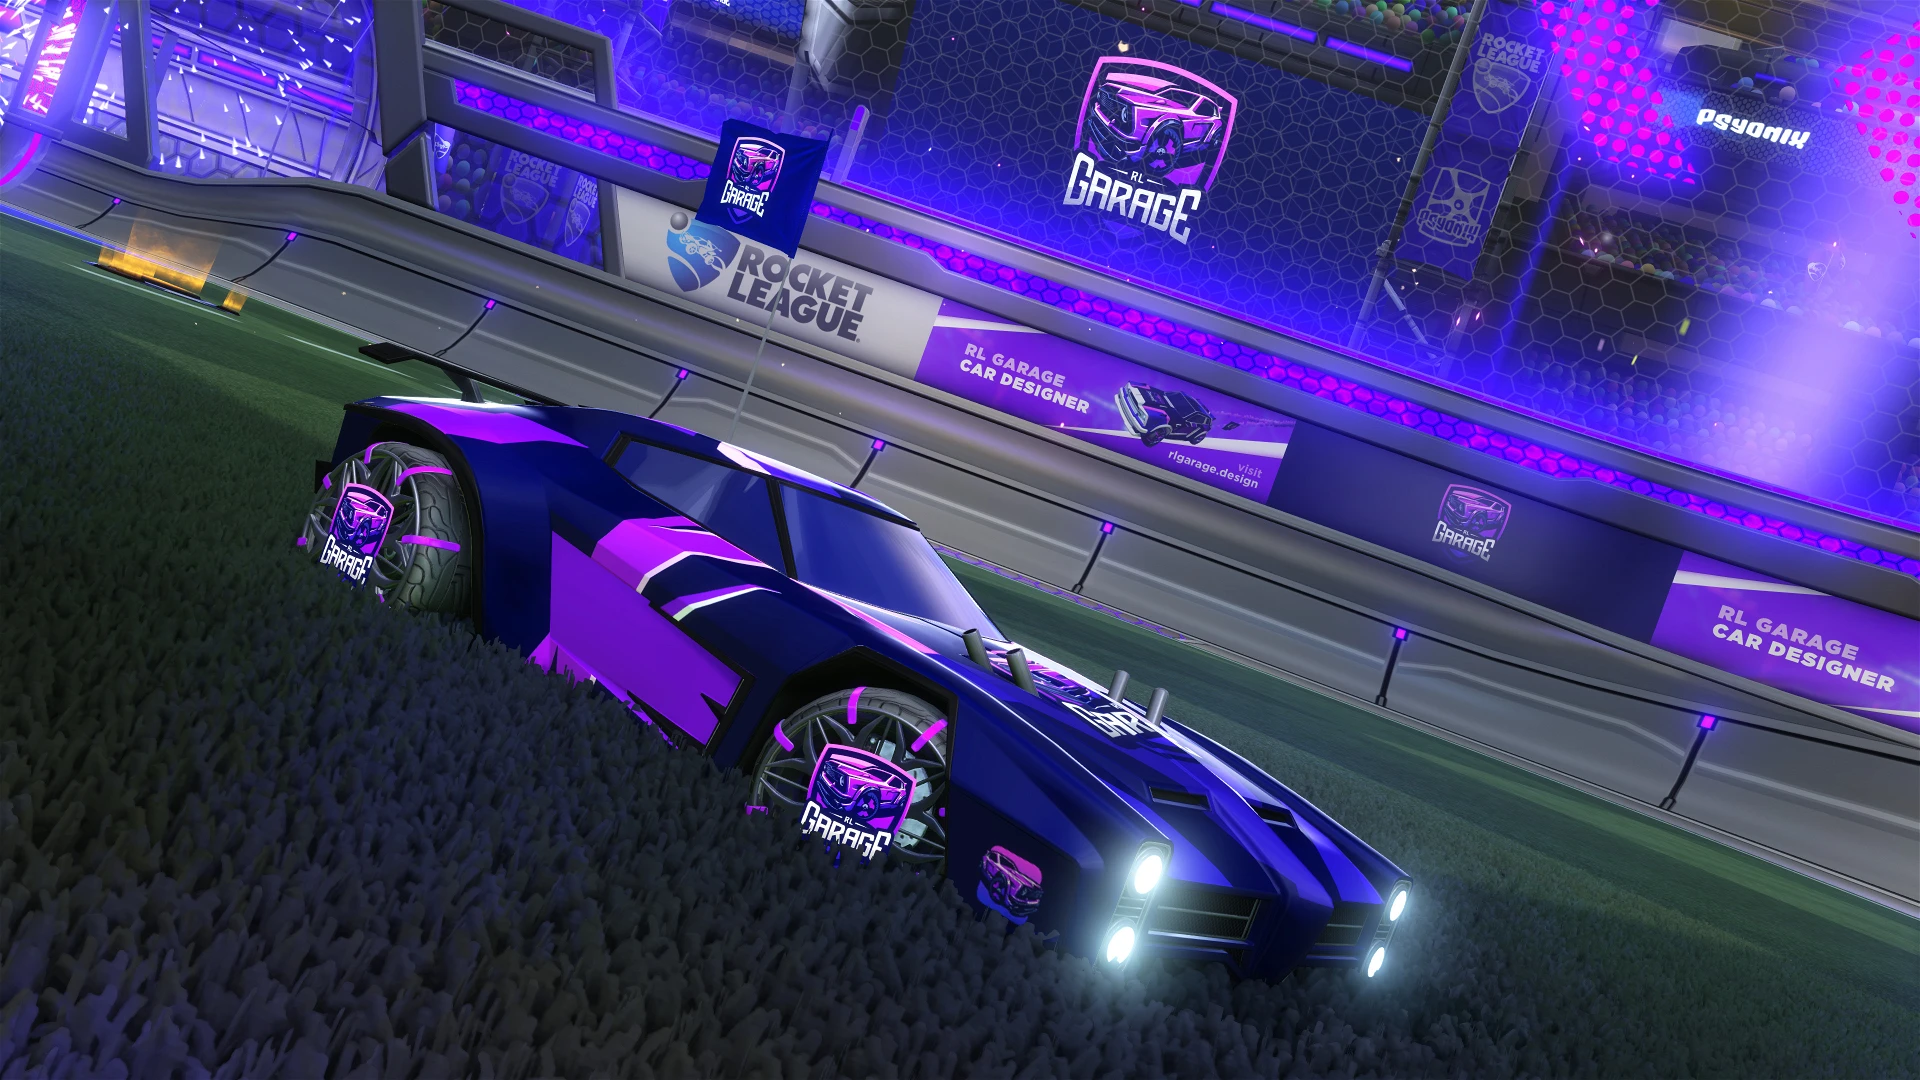 How much is a Dominus?